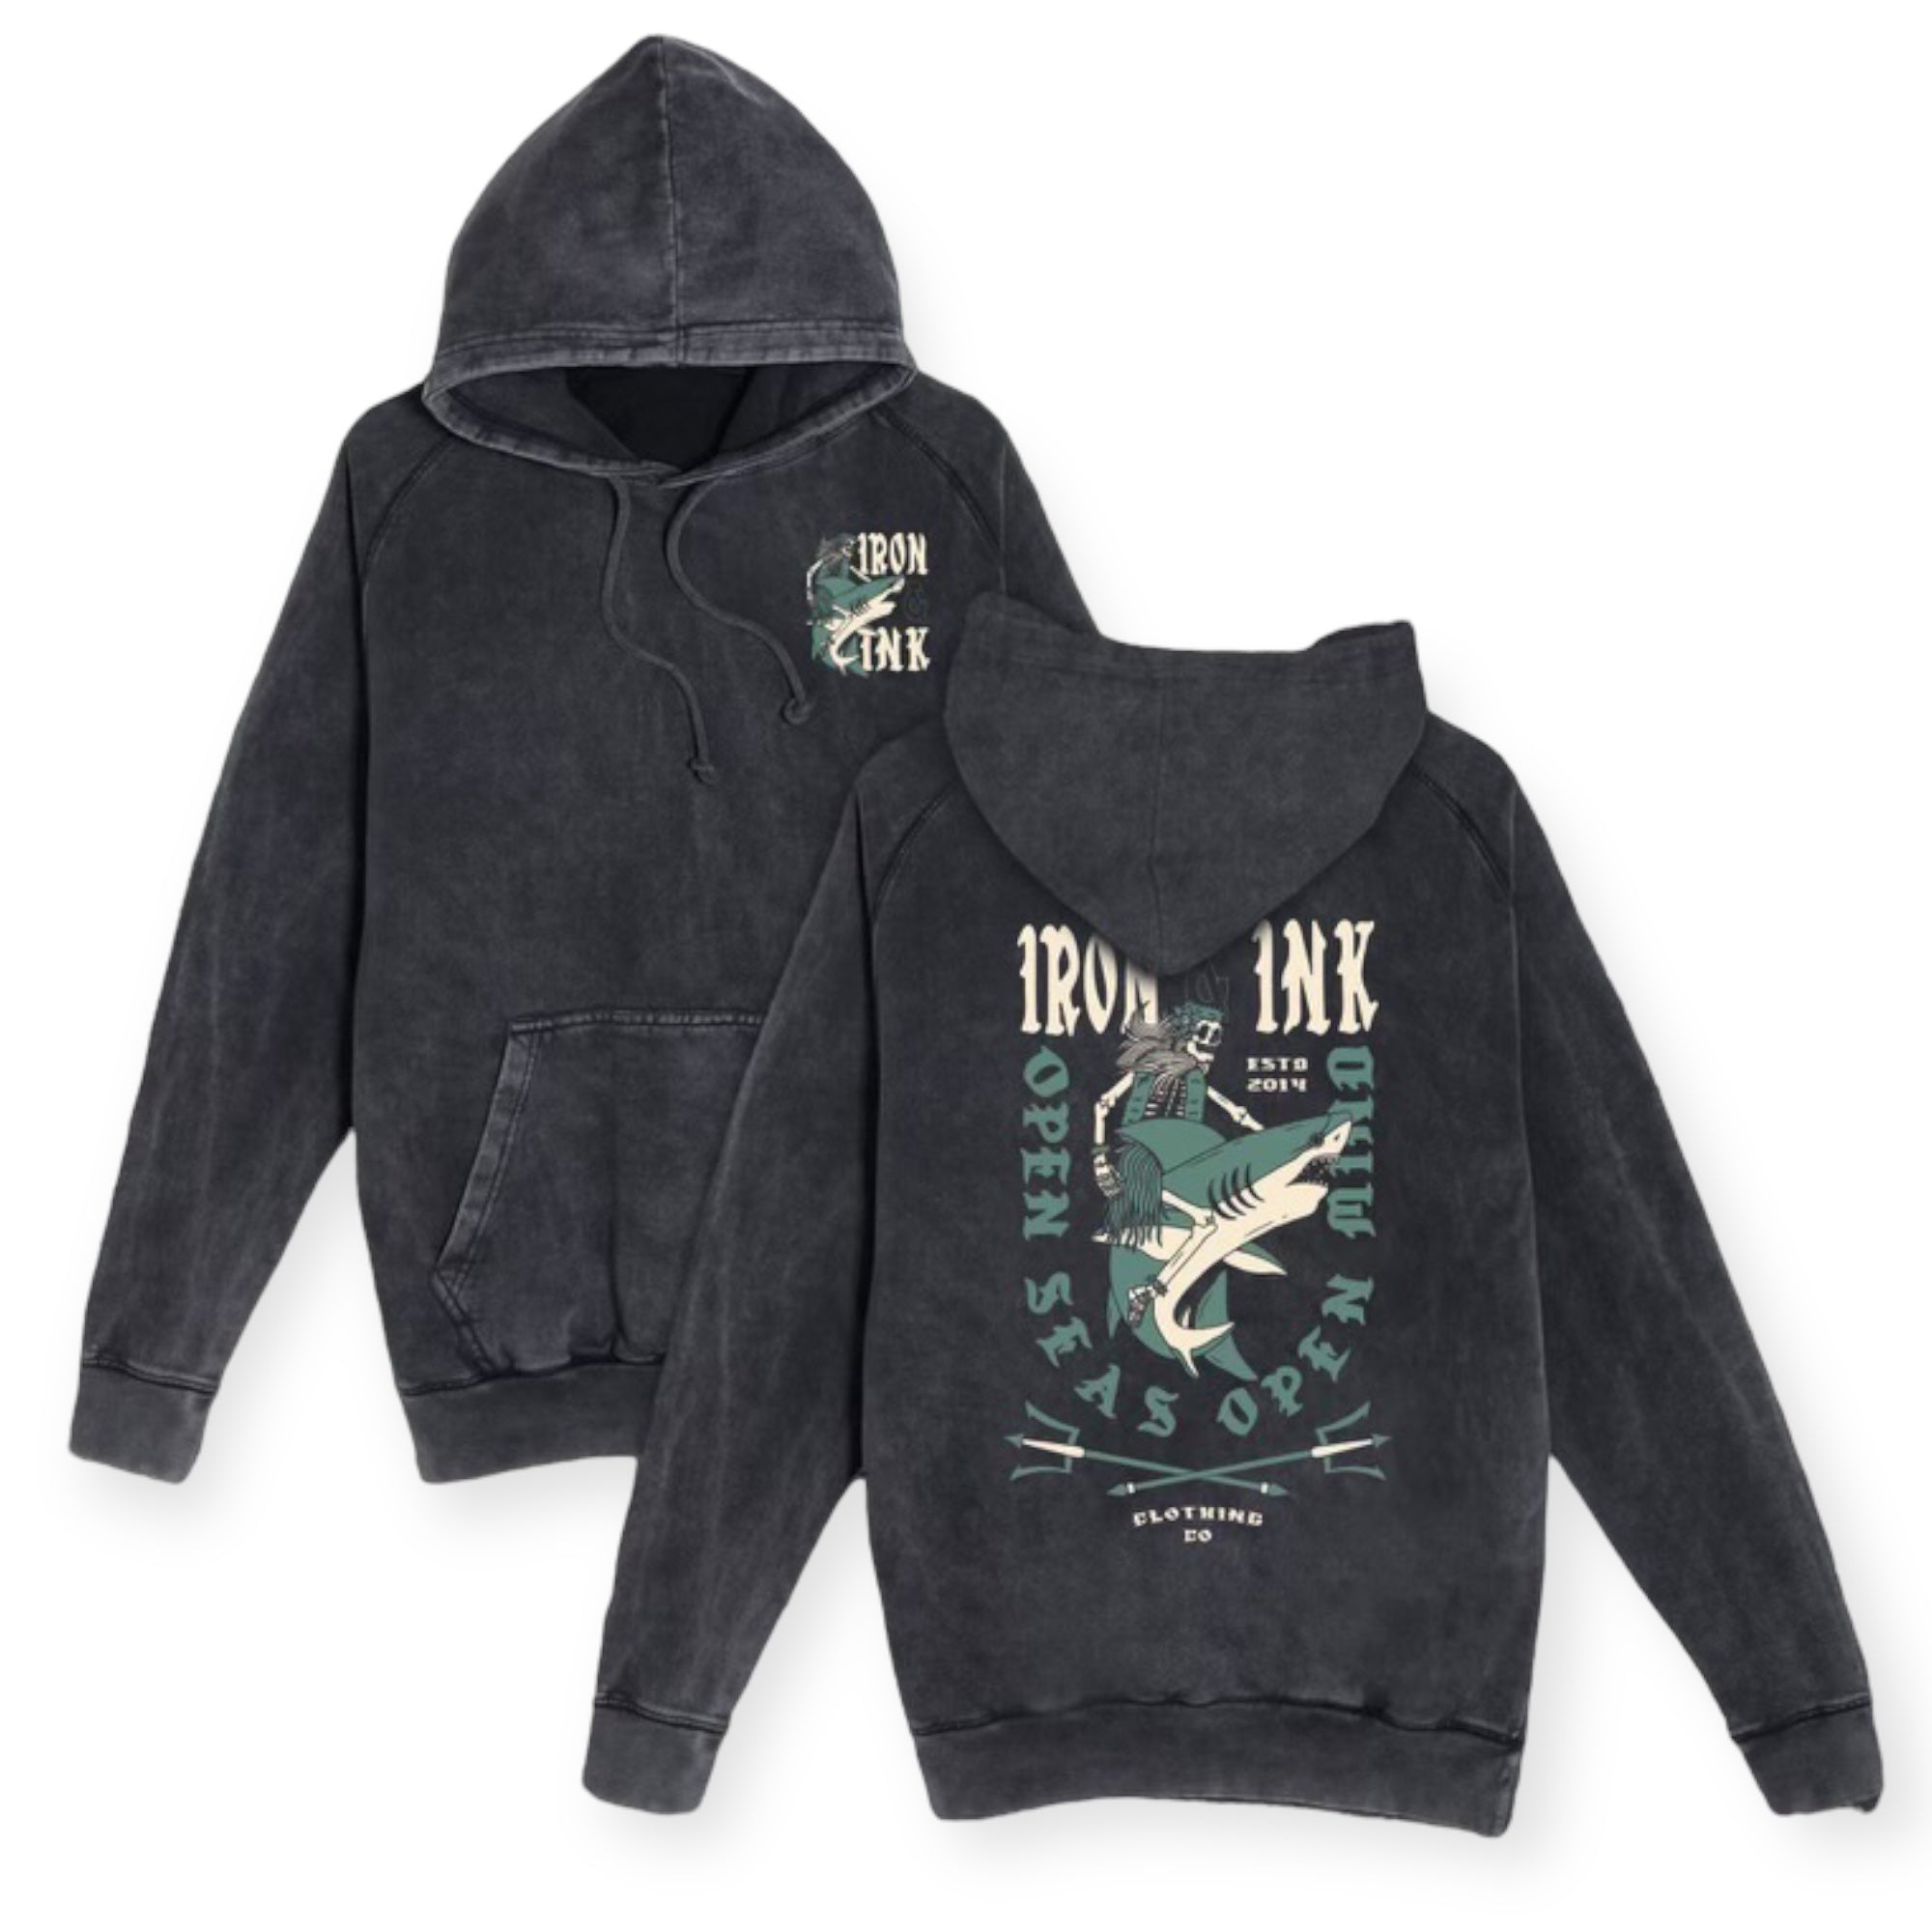 New BF EXCLUSIVE "Shark skull" mineral washed- hoodie